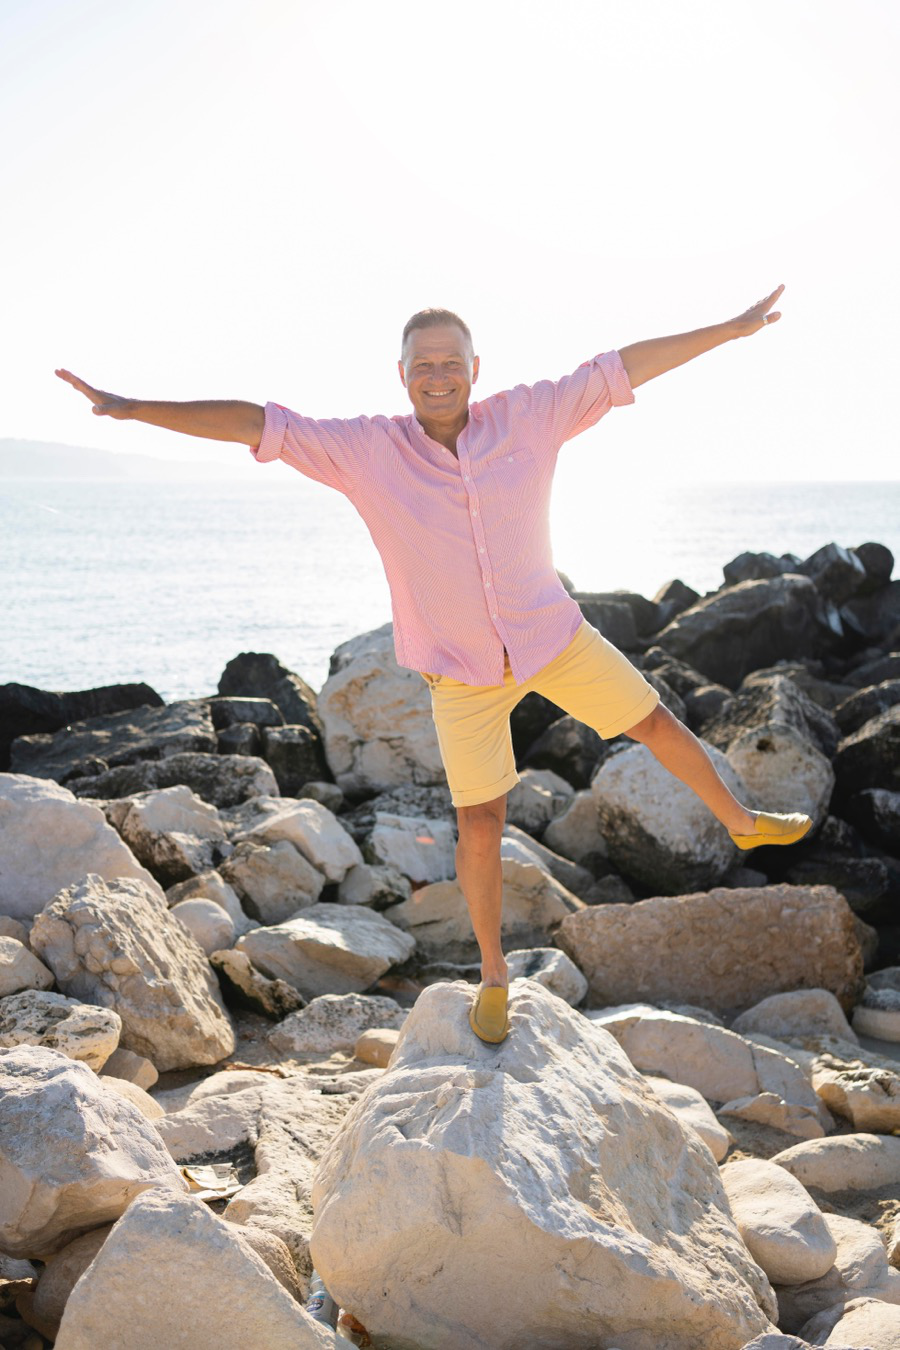 A man in a pink shirt balancing on one leg while standing on a rock